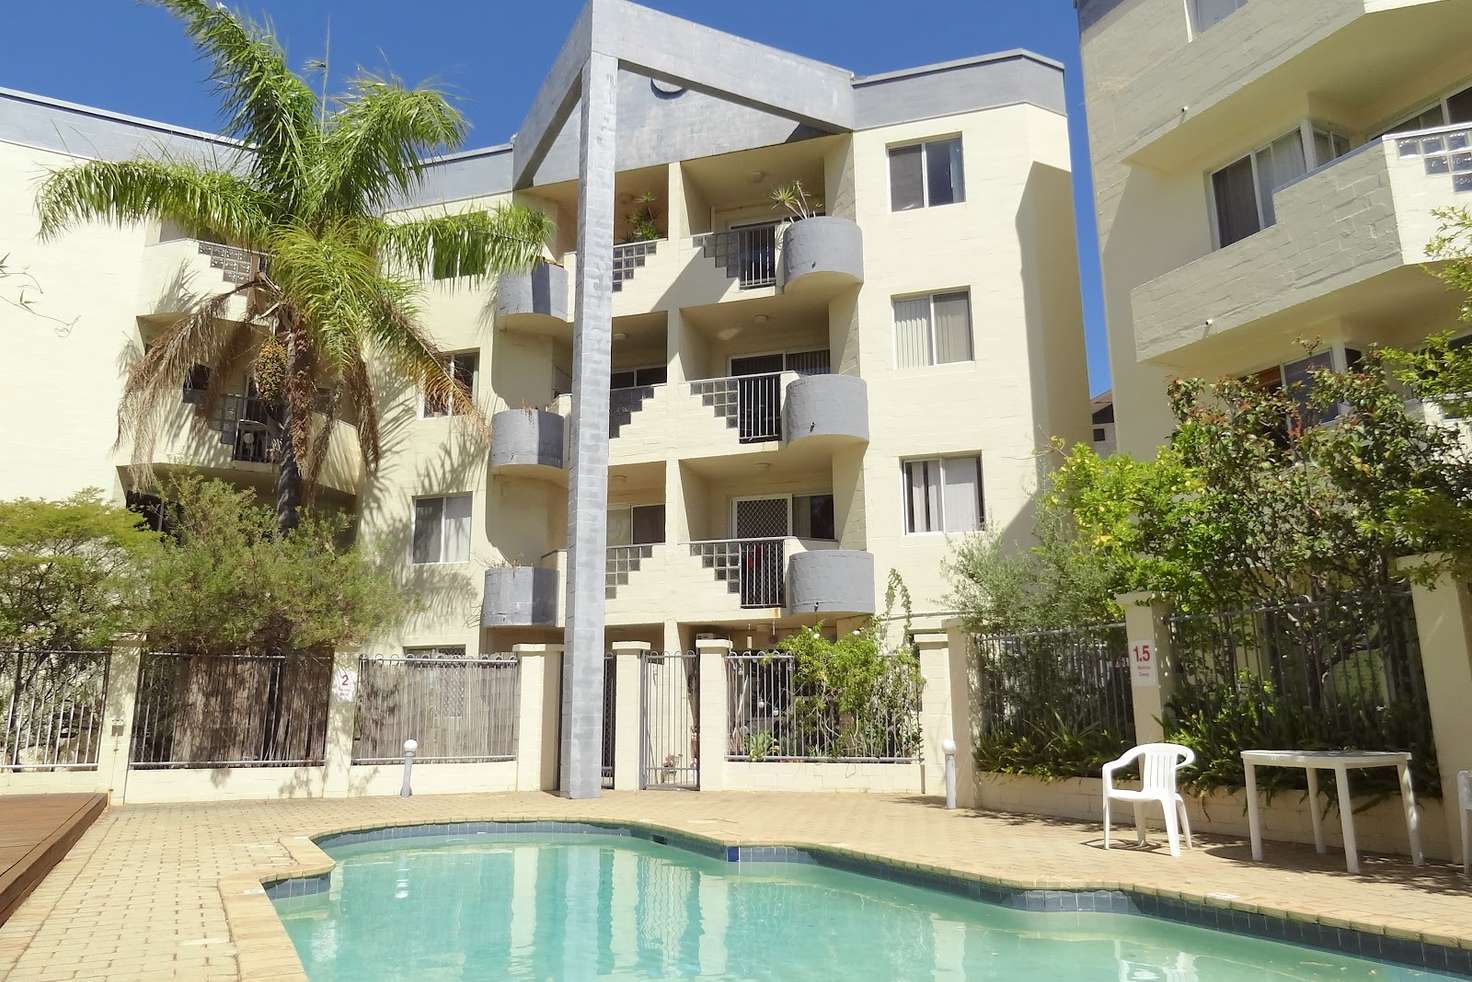 Main view of Homely apartment listing, 4/11 Mcatee Court, Fremantle WA 6160